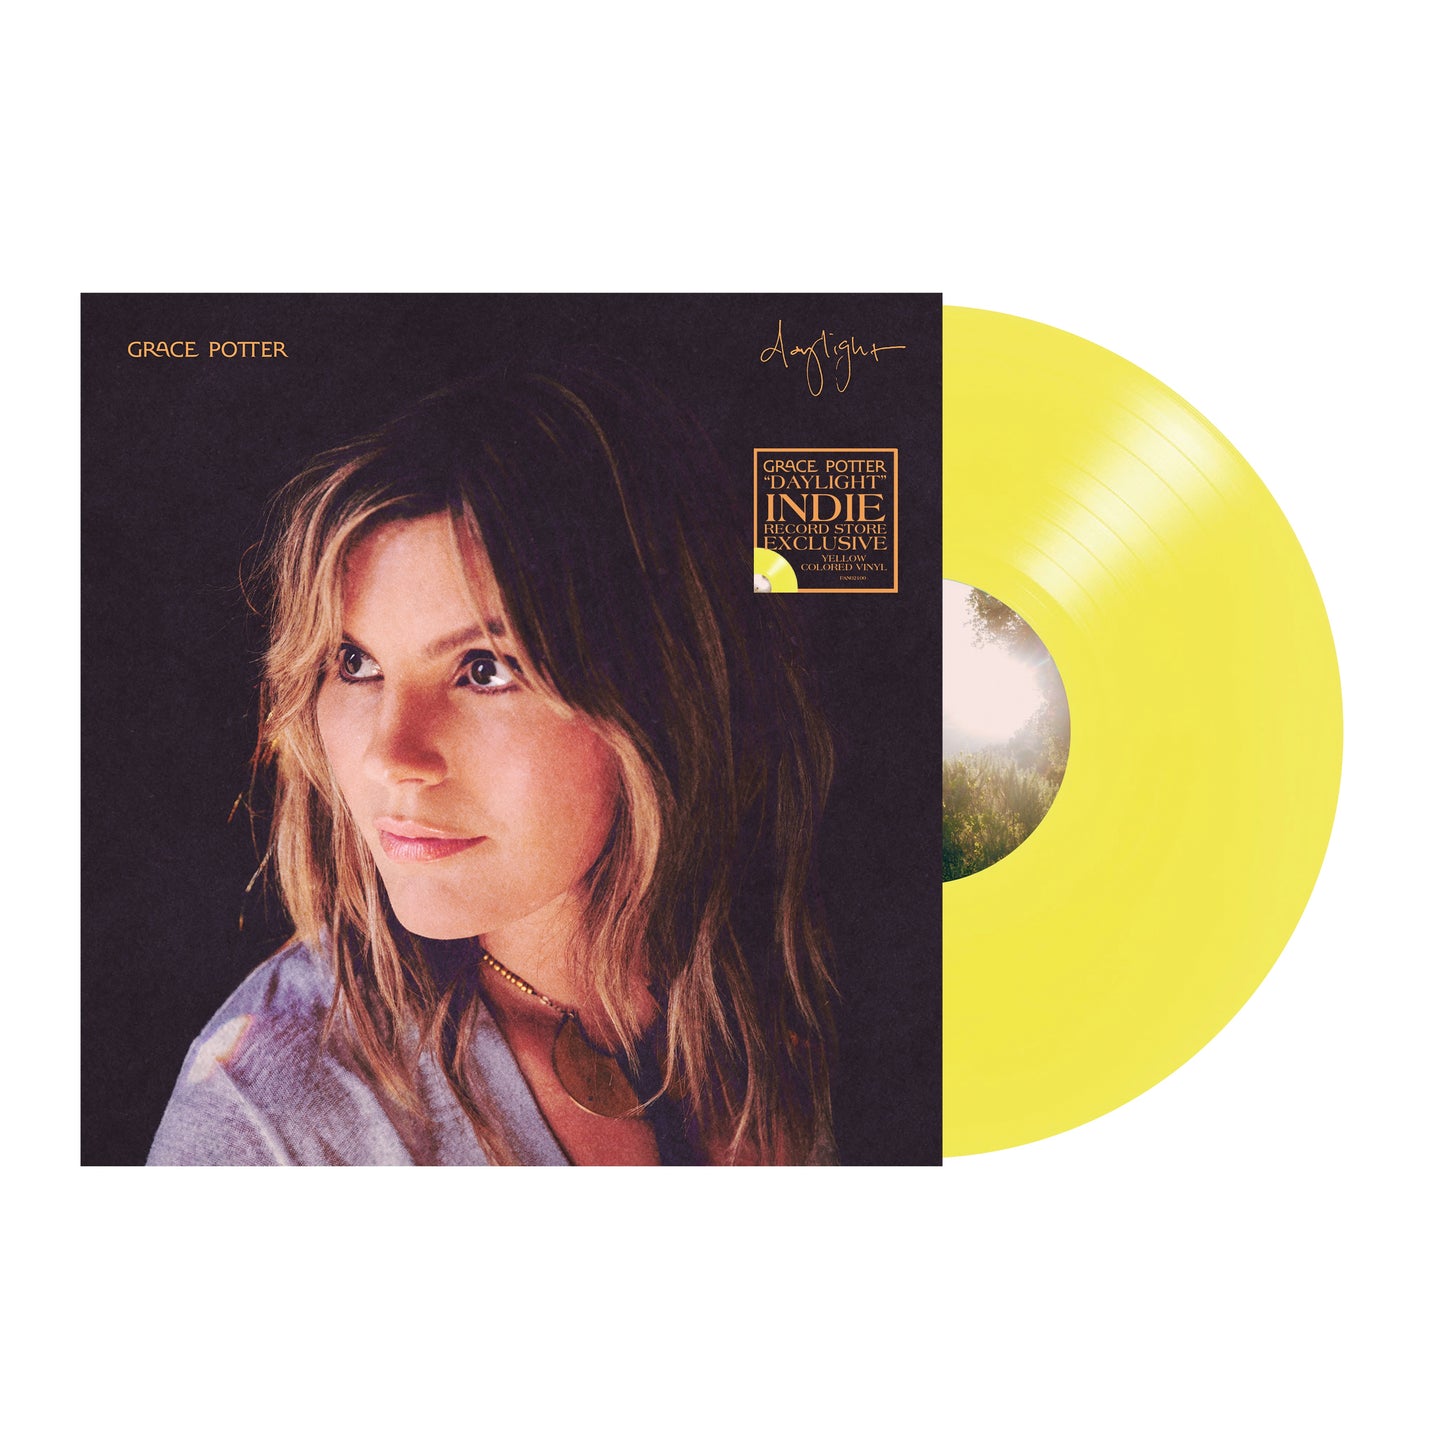 Grace Potter - Daylight (Indie Exclusive, Colored Vinyl, Yellow, Limited Edition)